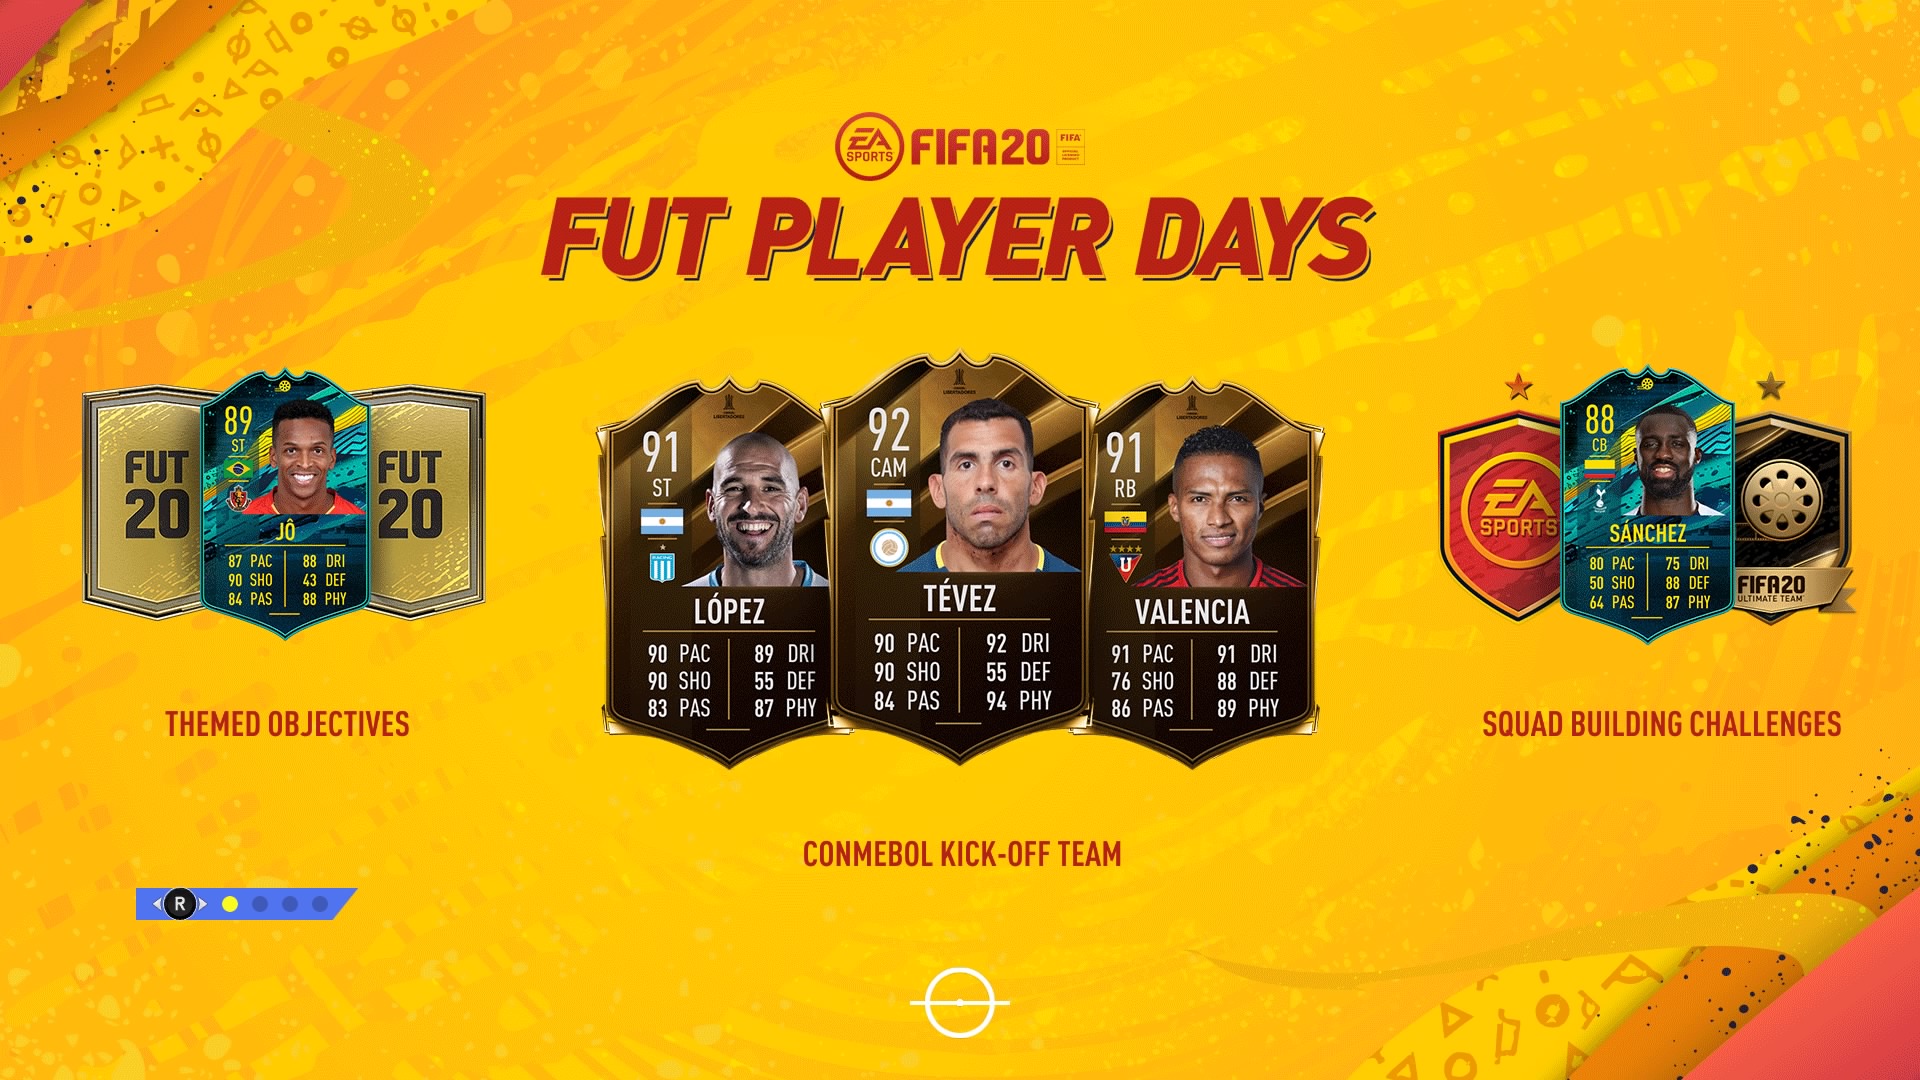 Fifa 20 Fut Player Days Guide How To Get Free Packs And Upgrades